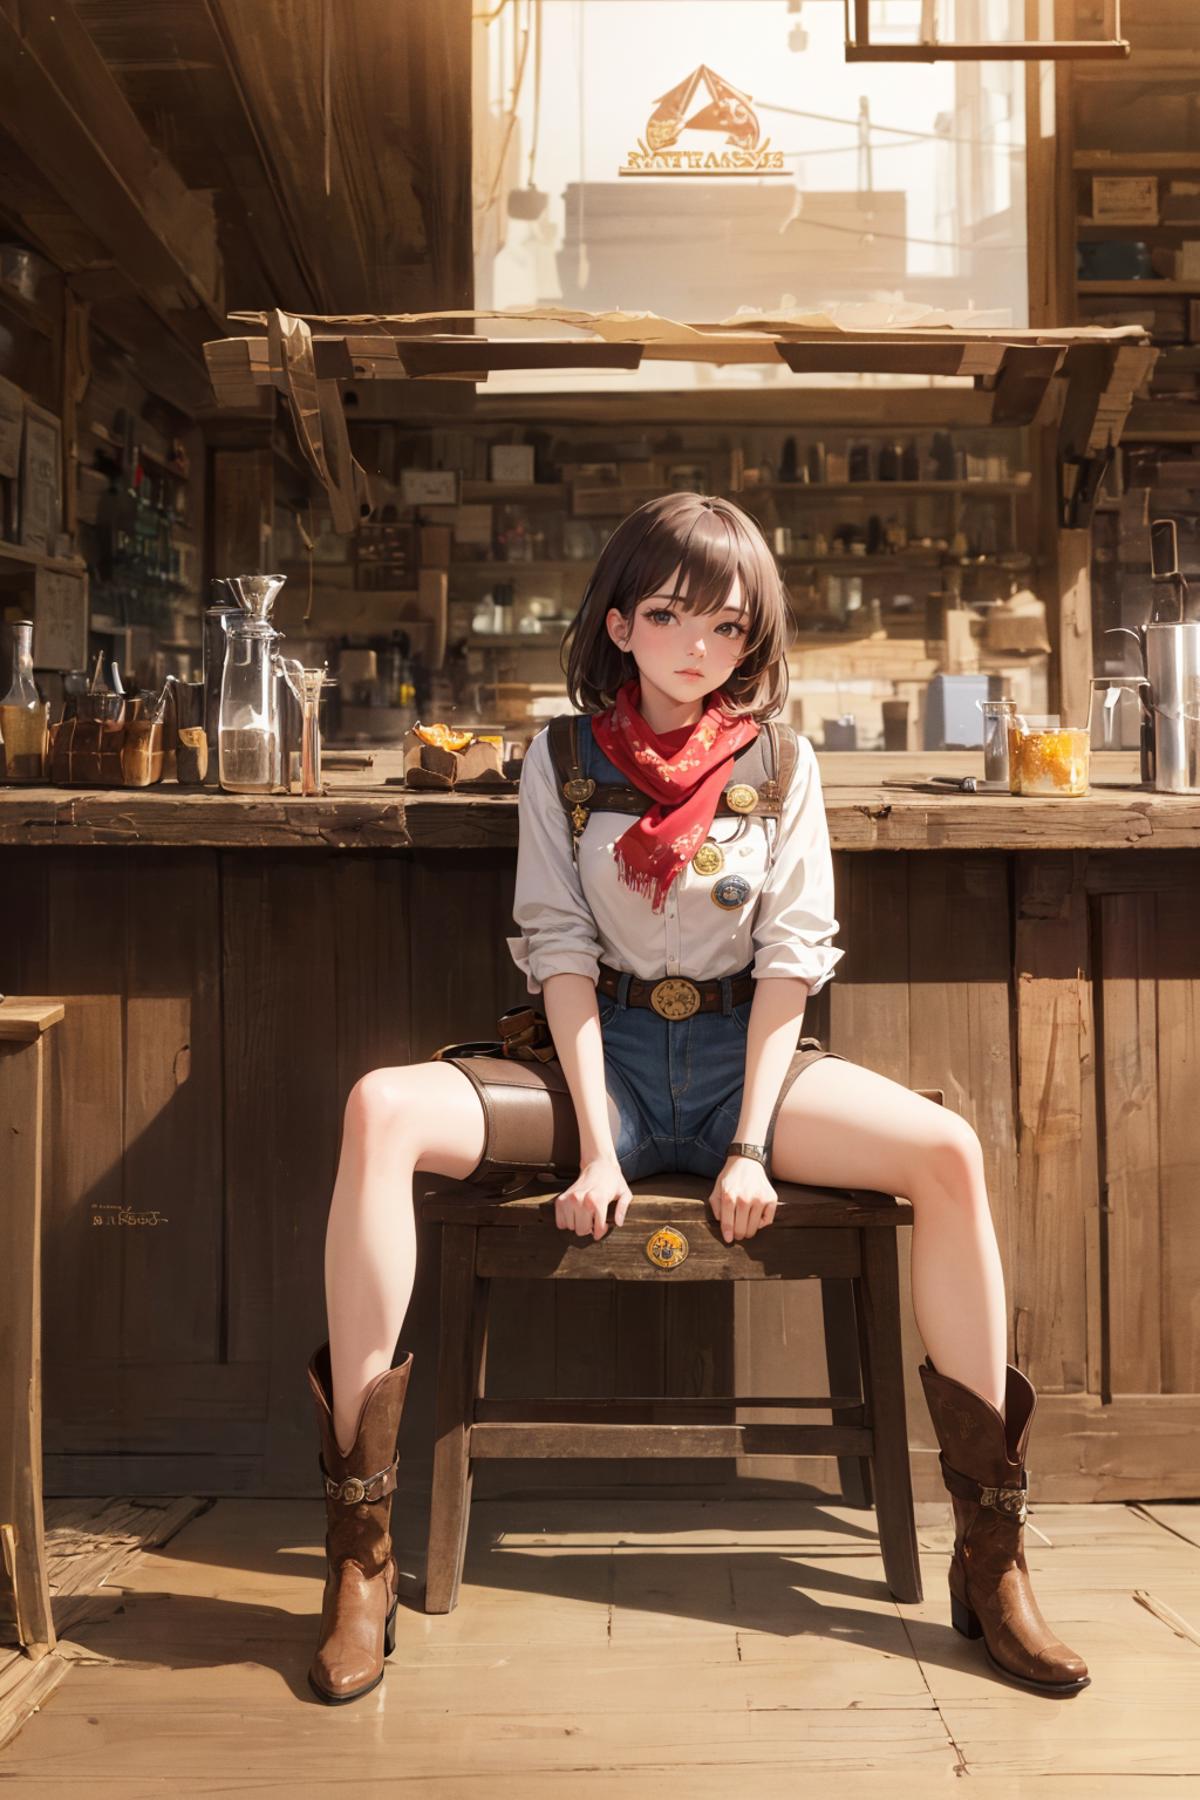 Cowgirl outfit image by Tokugawa